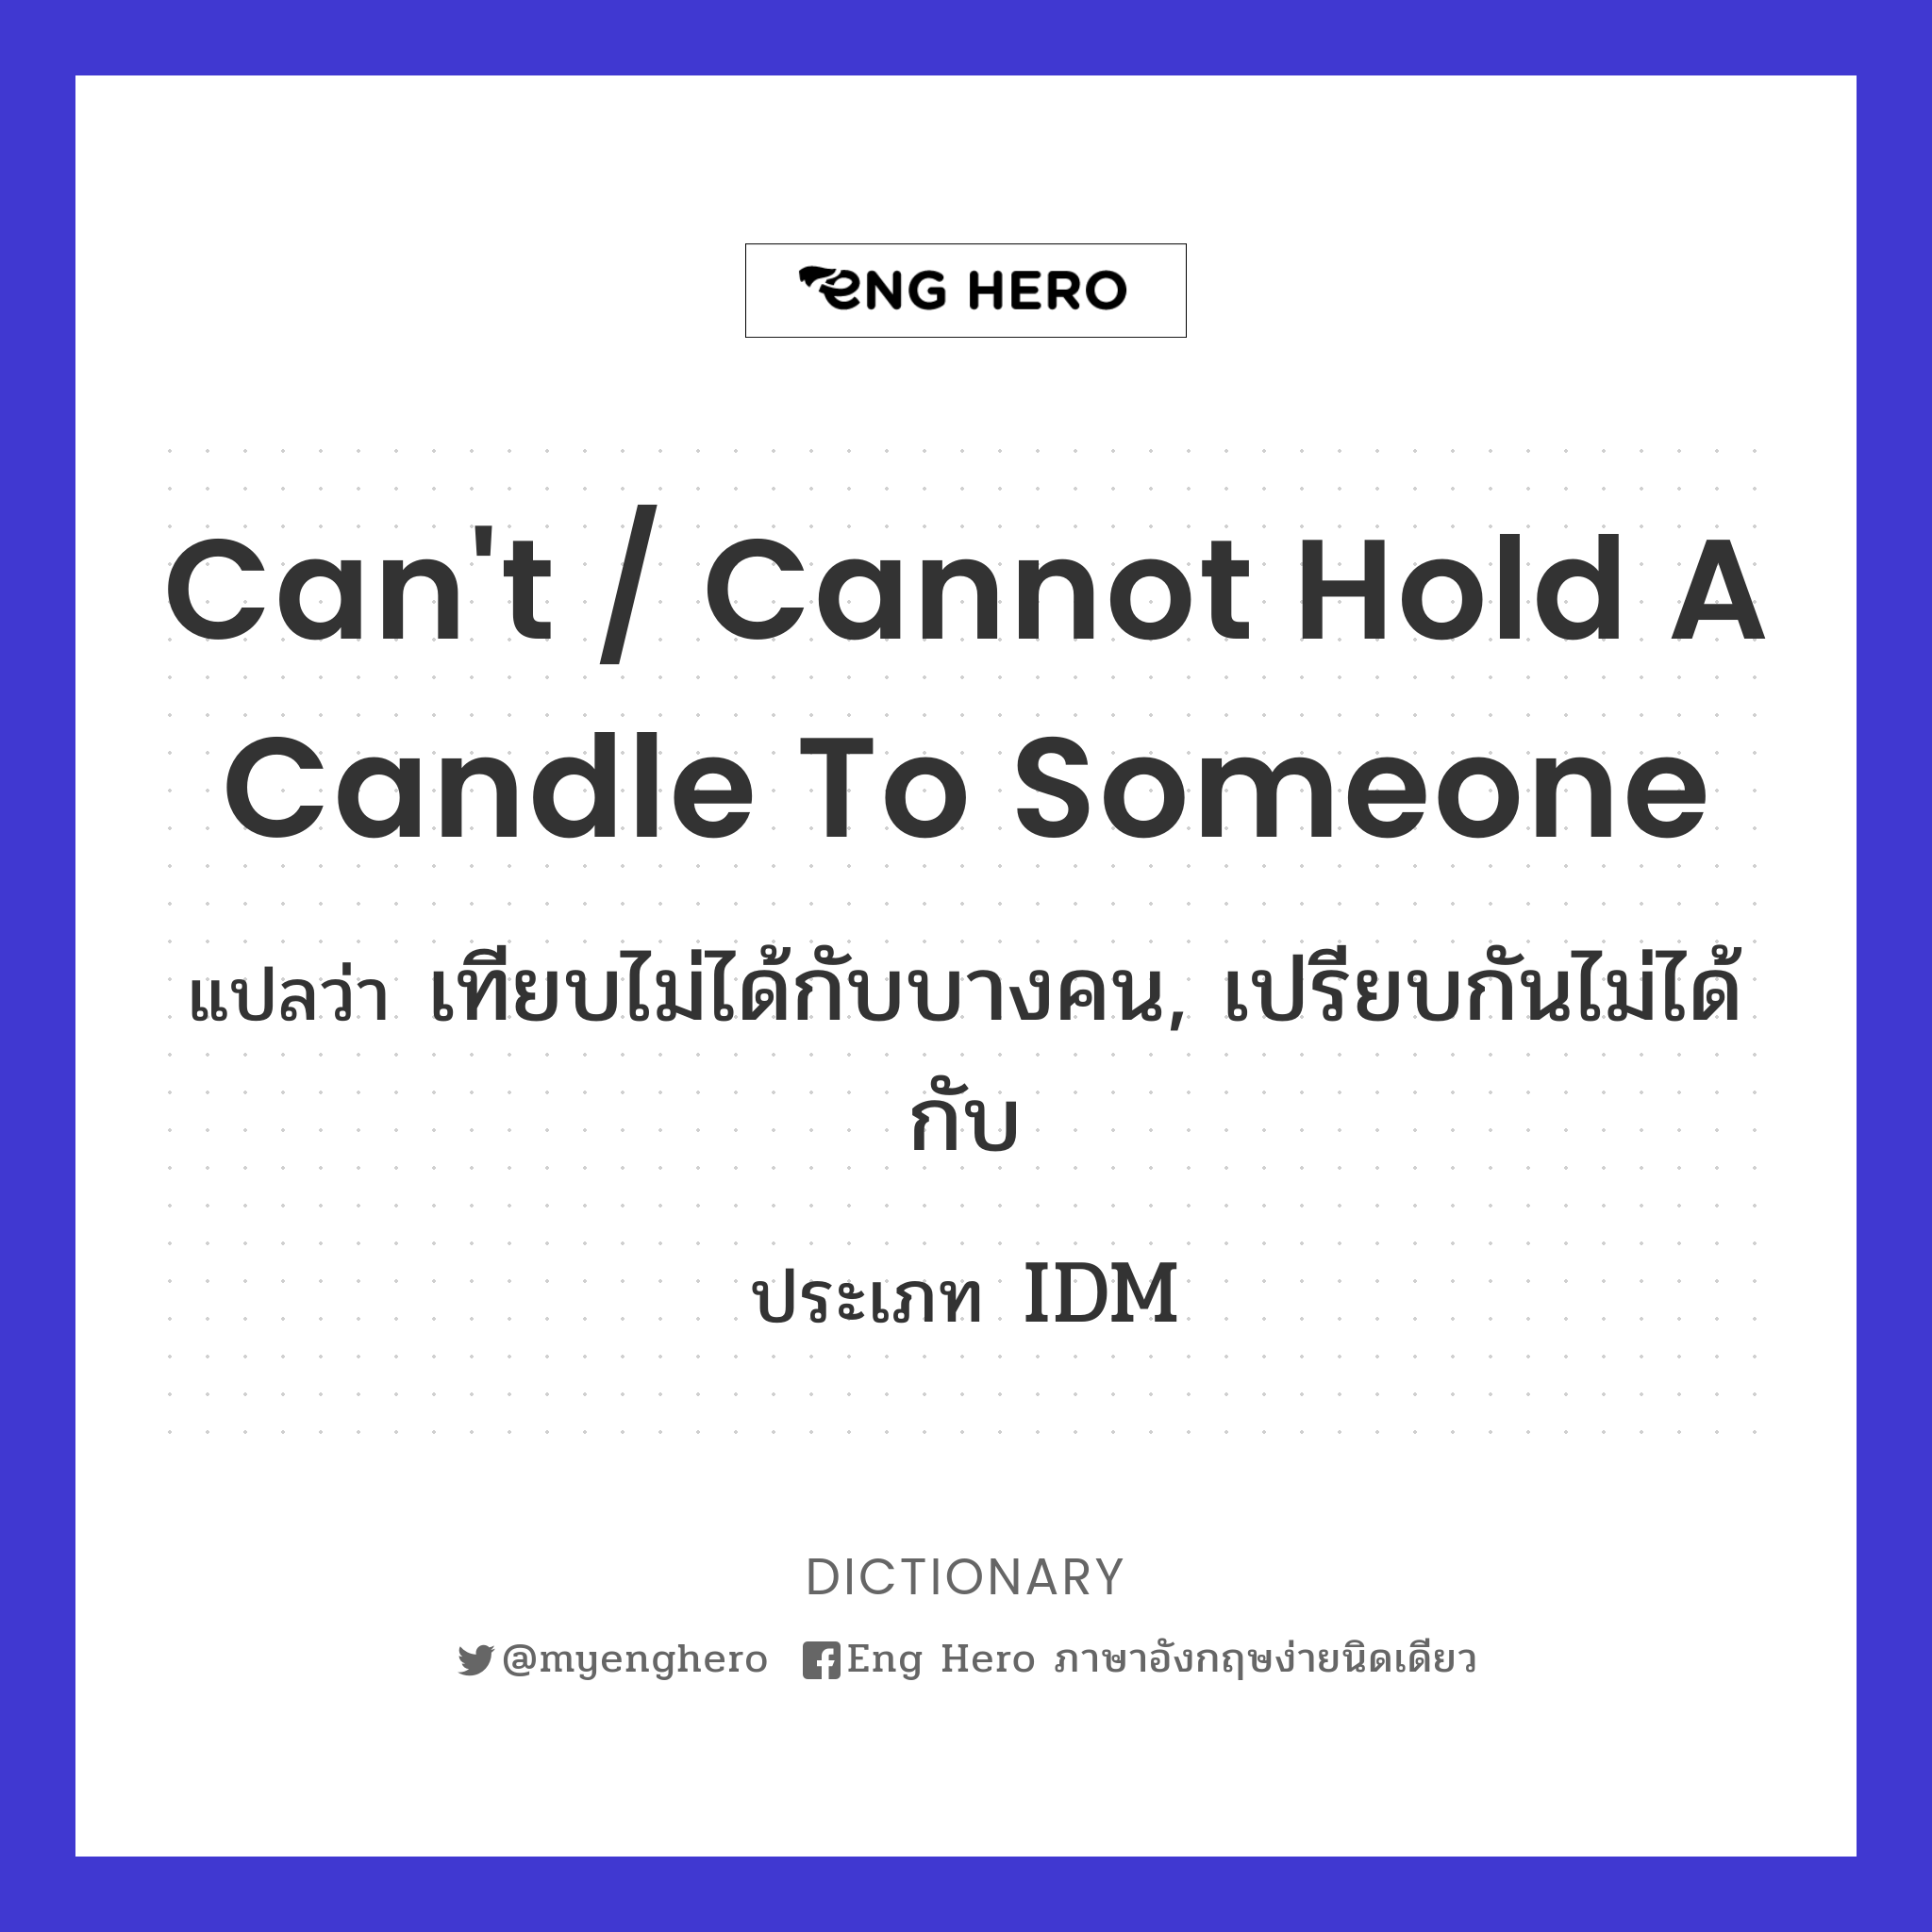 can't / cannot hold a candle to someone